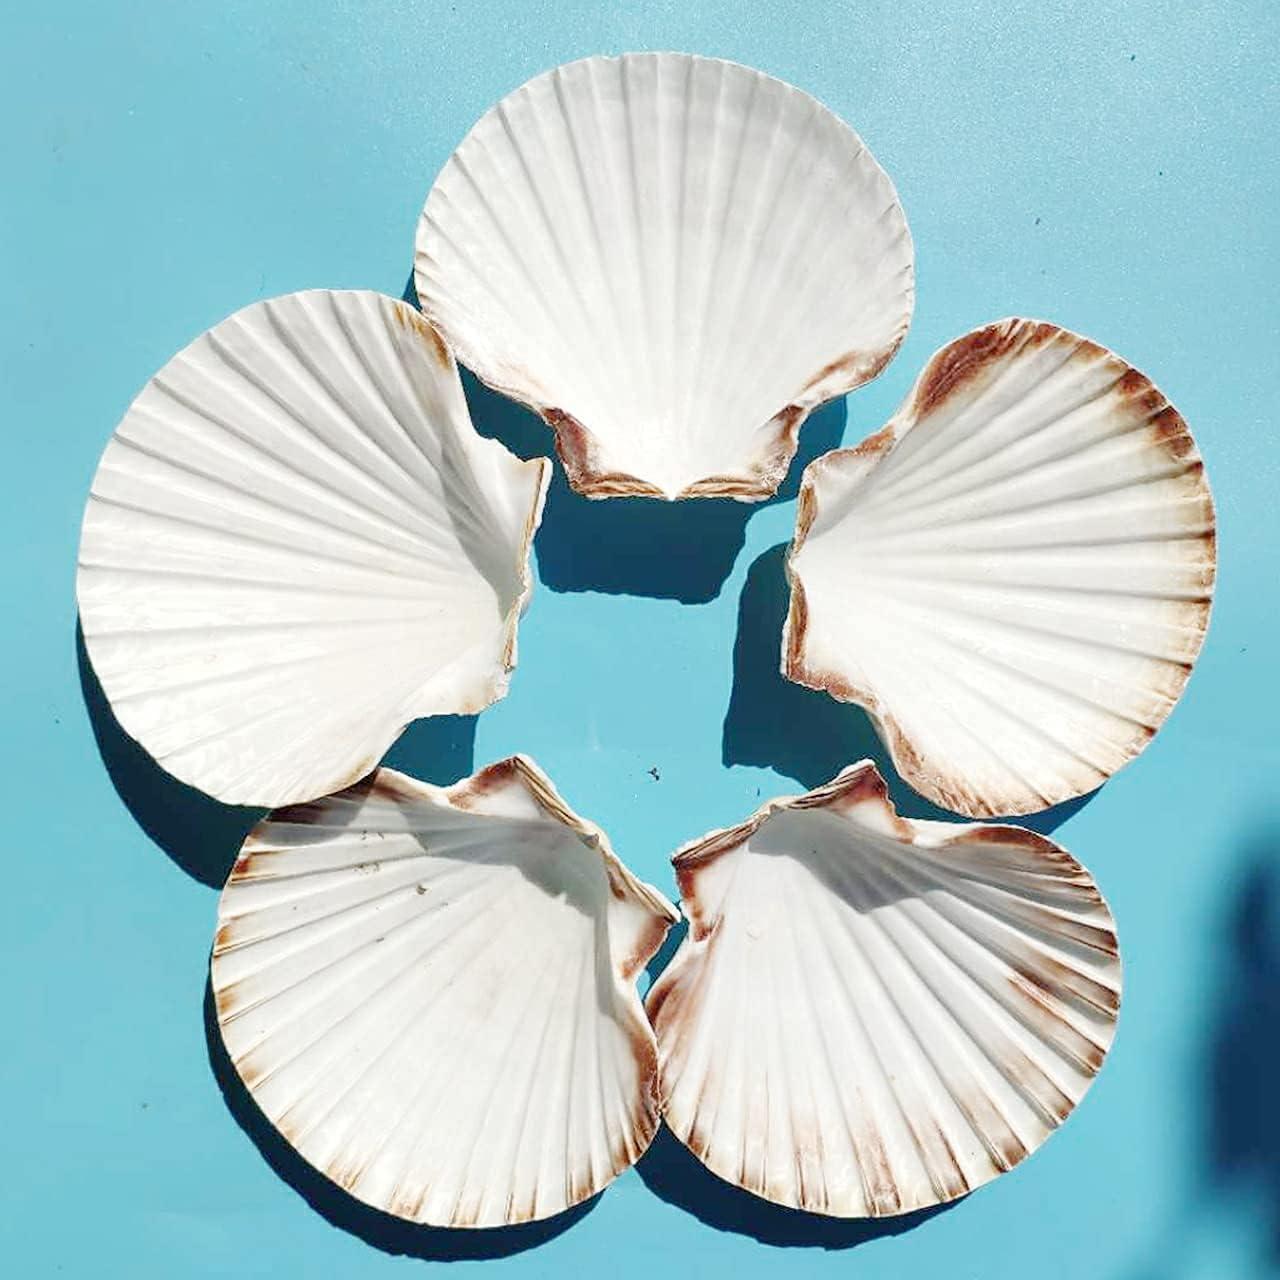 6 Pack 4-5 Inch Large Scallop Shells Sea Shells for Crafting Beach Decor